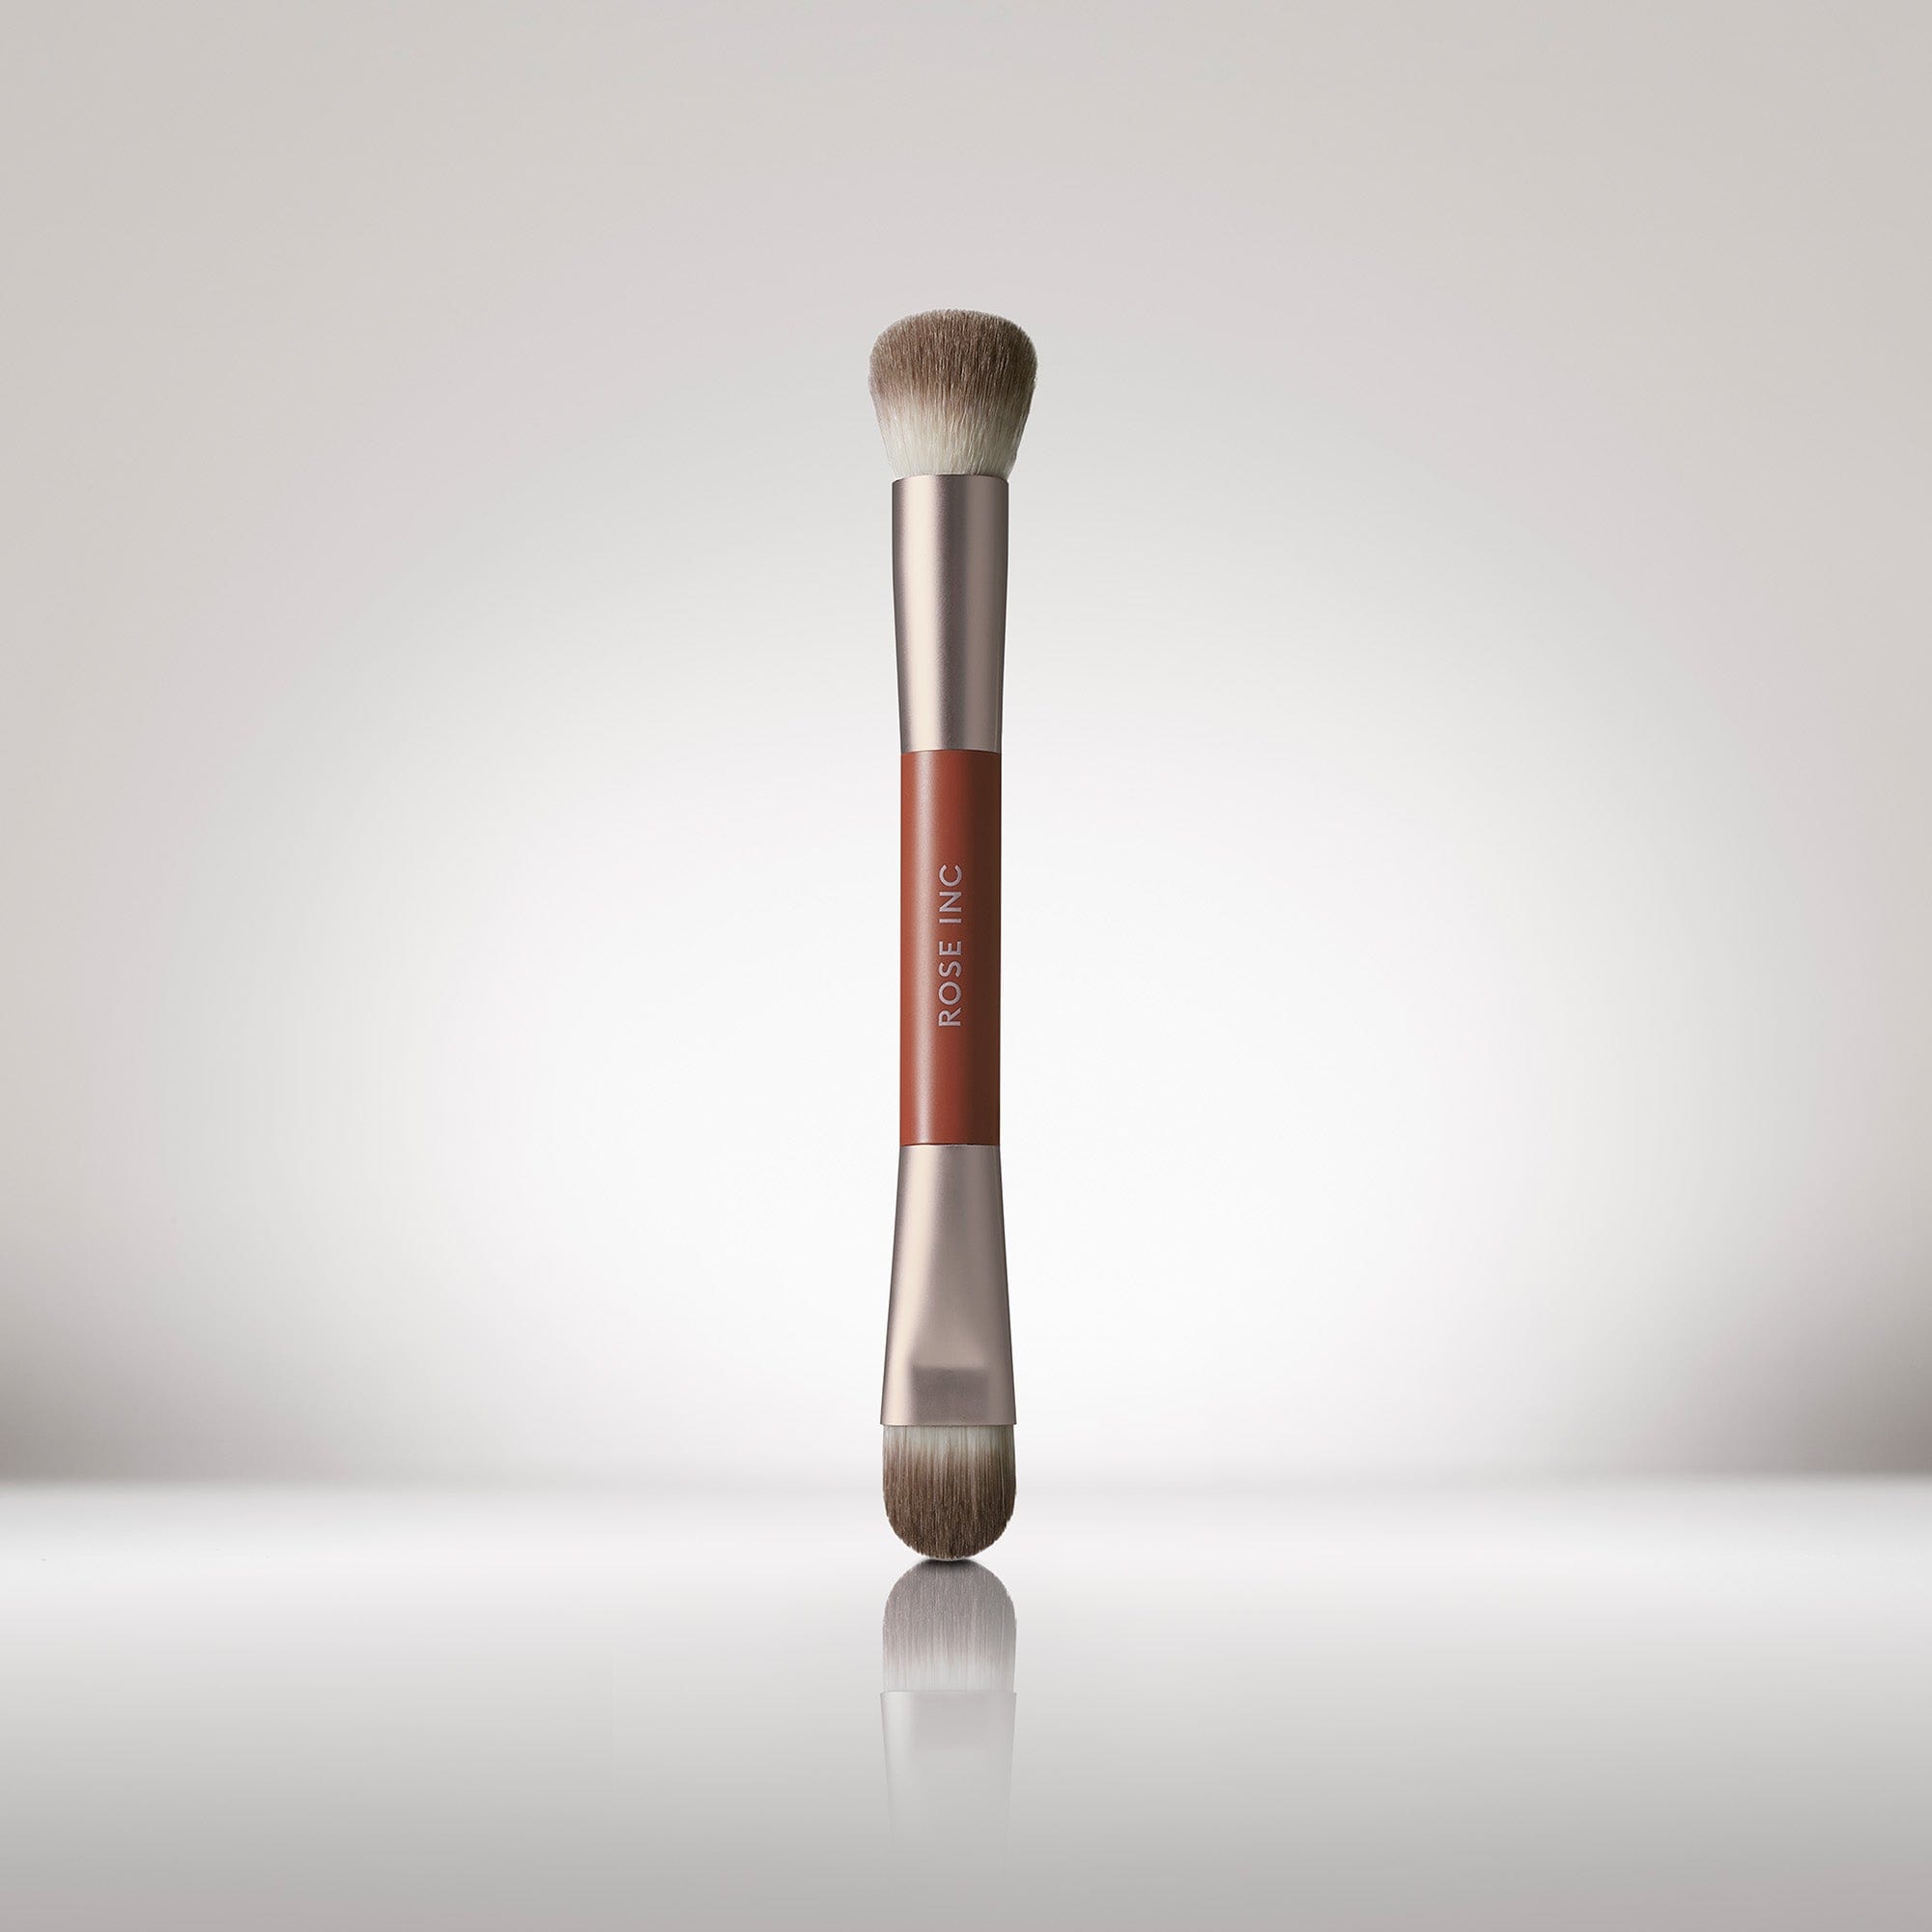 Two Minute Tip -; Are these $50 blending brushes worth it or are